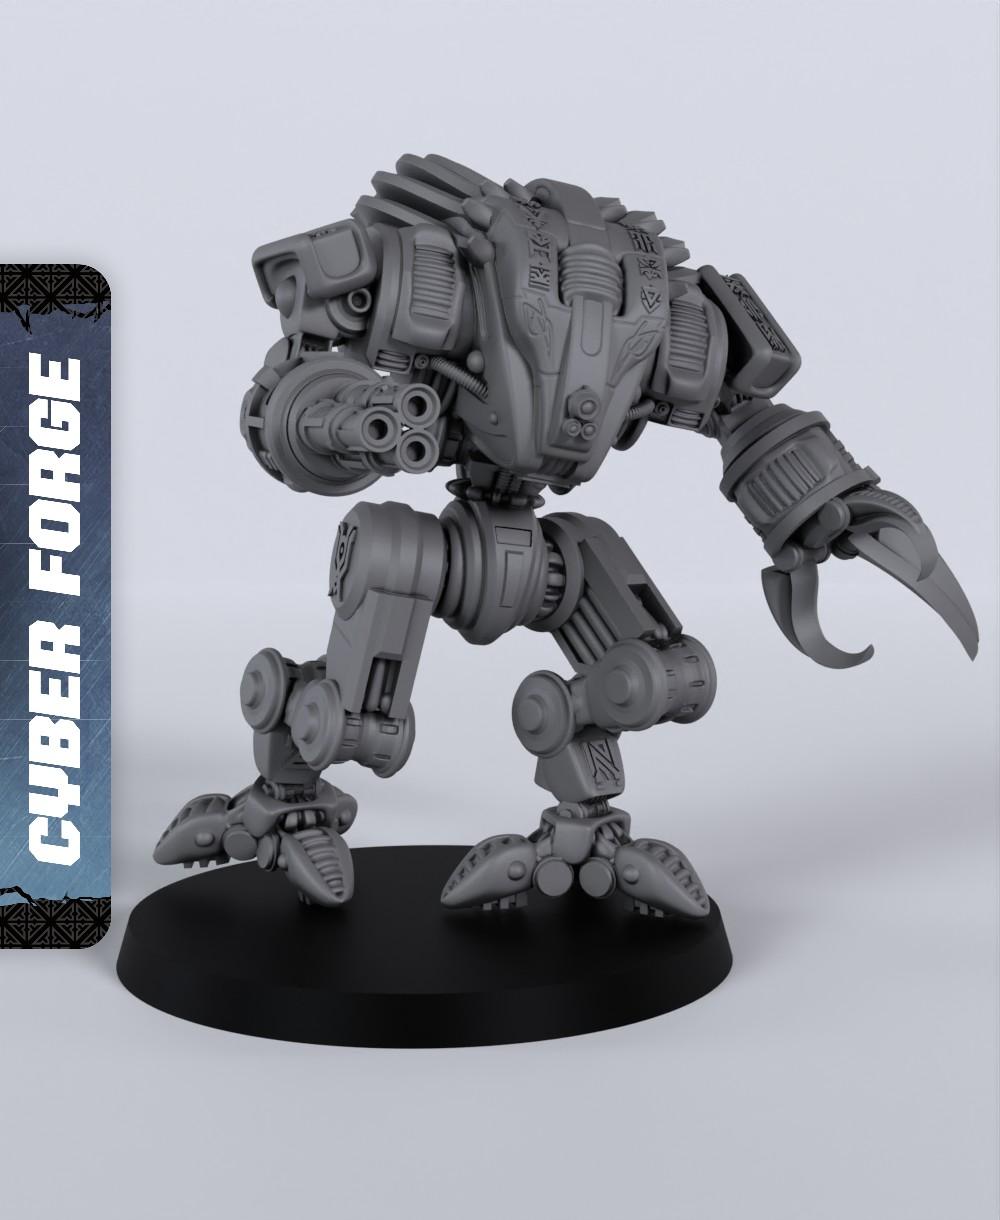 Kaplan Assault Bot - With Free Cyberpunk Warhammer - 40k Sci-Fi Gift Ideas for RPG and Wargamers 3d model